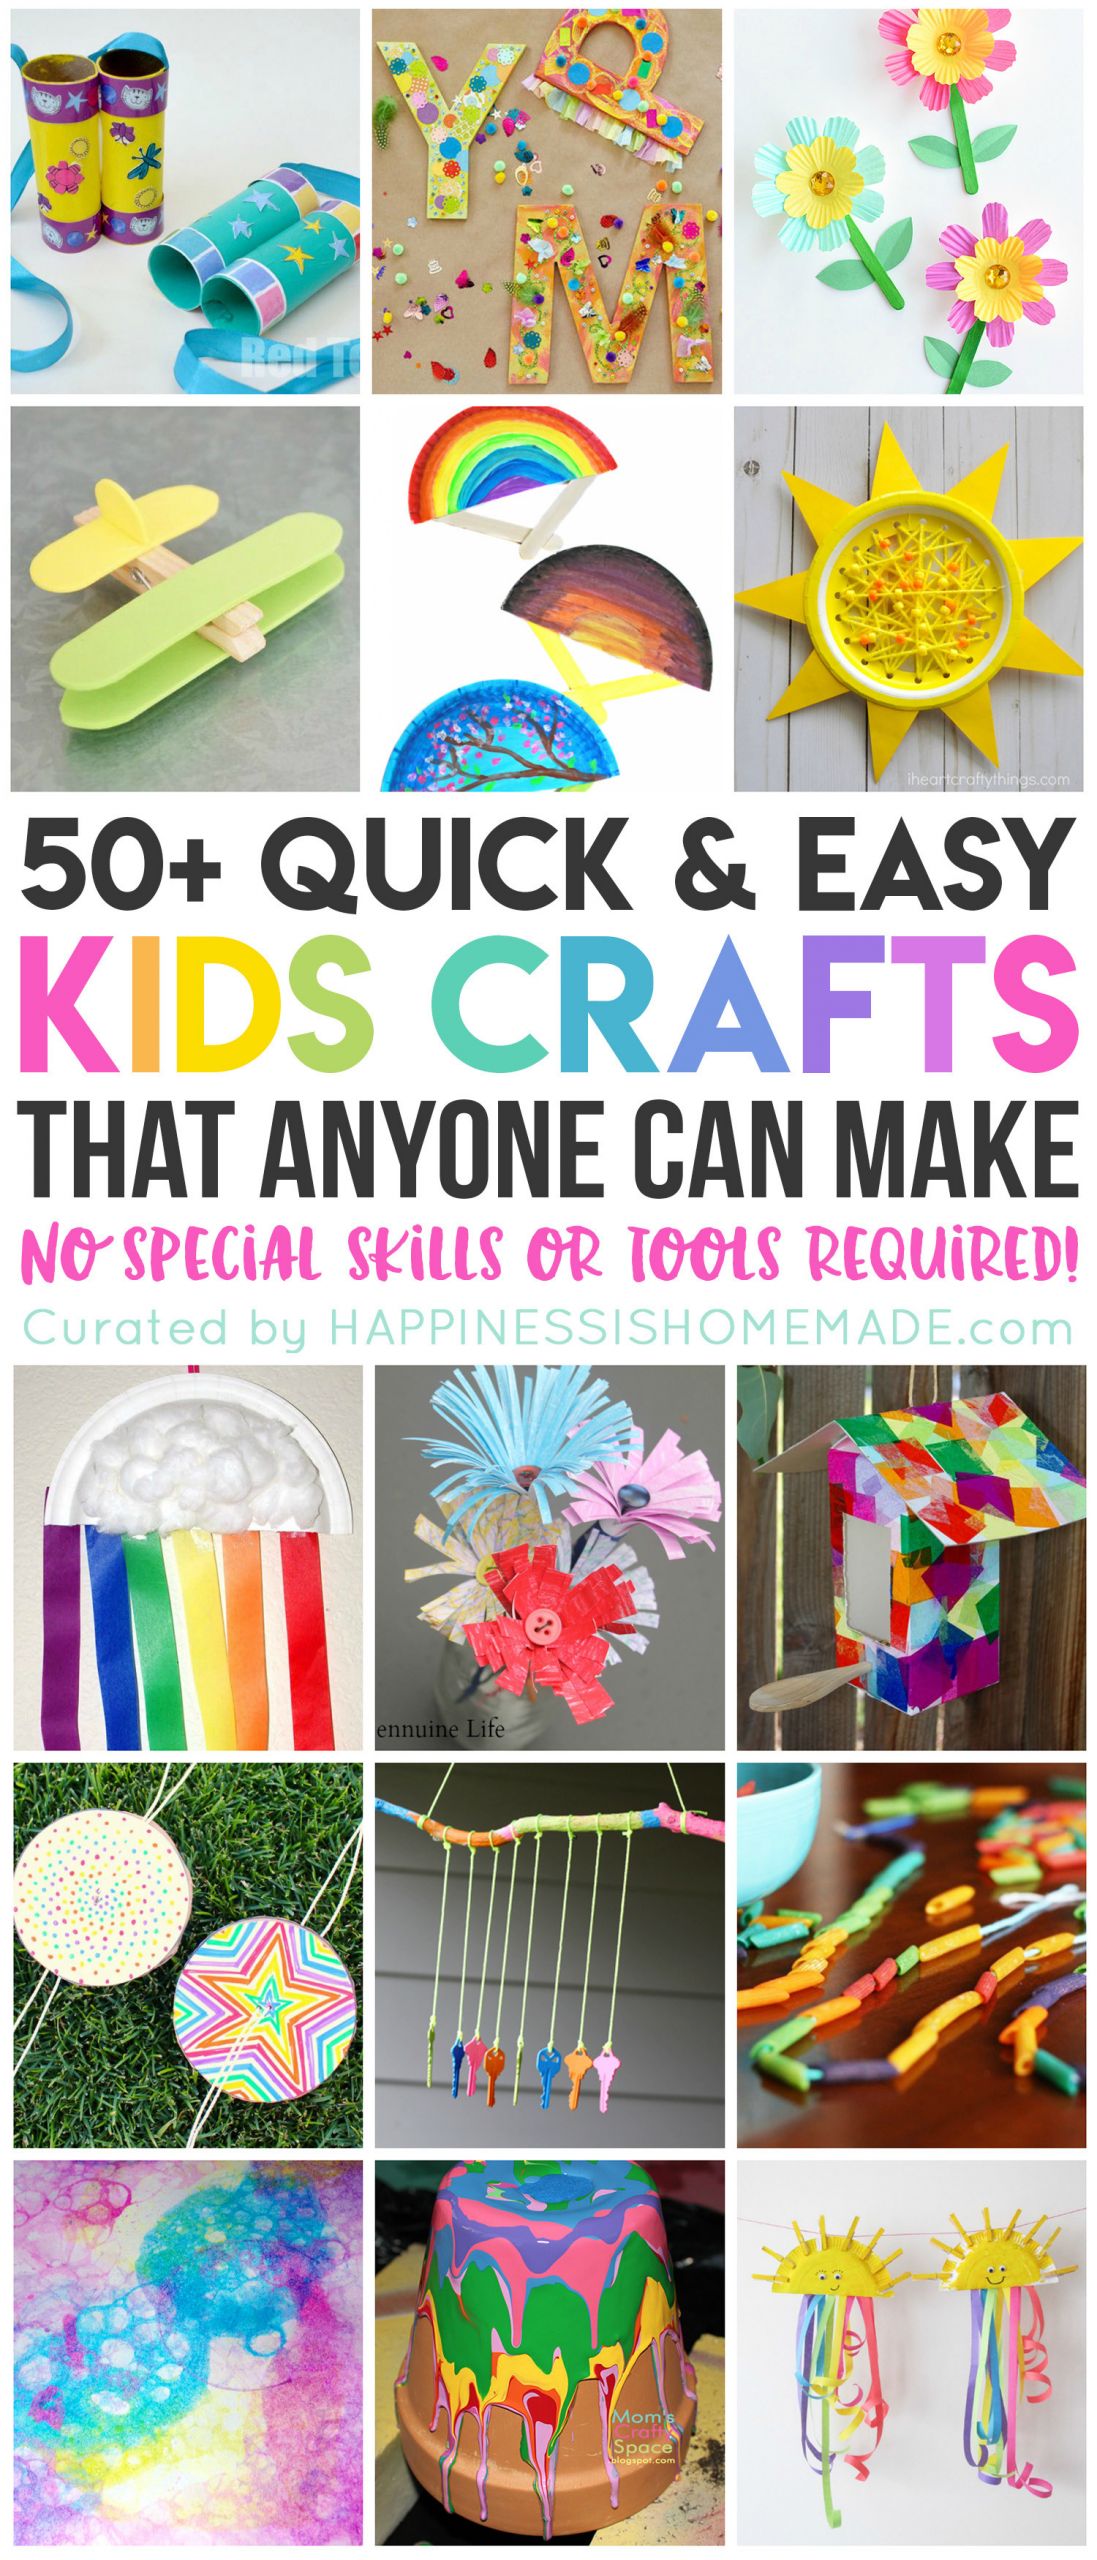 Easy Crafts For Kids To Make
 50 Quick & Easy Kids Crafts that ANYONE Can Make